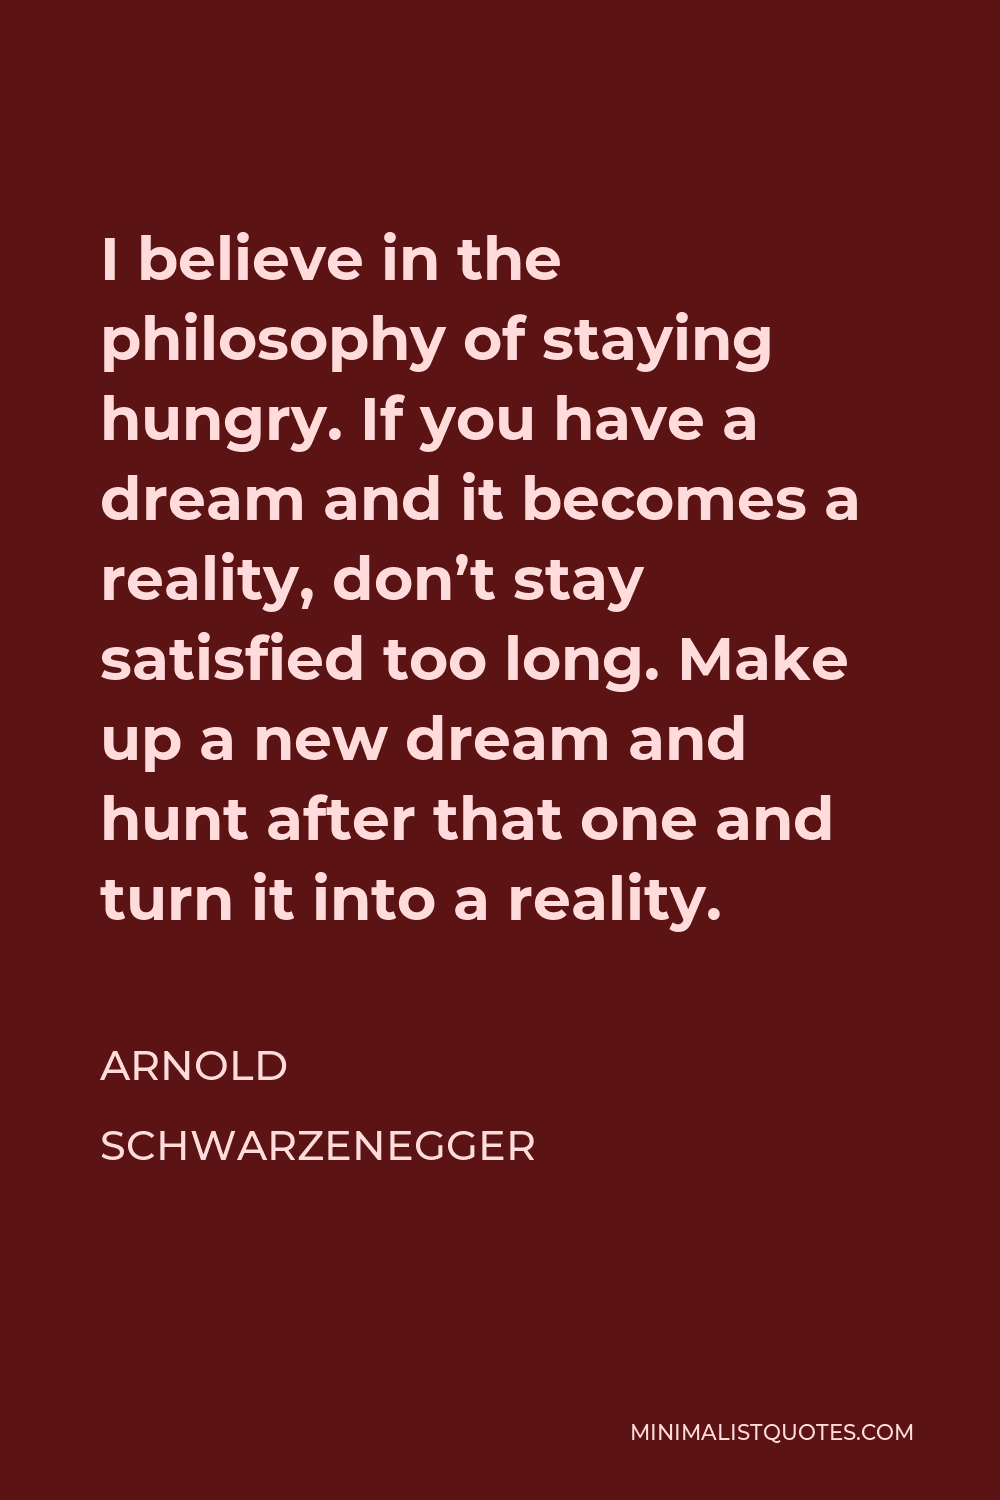 Arnold Schwarzenegger Quote - I believe in the philosophy of staying hungry. If you have a dream and it becomes a reality, don’t stay satisfied too long. Make up a new dream and hunt after that one and turn it into a reality.